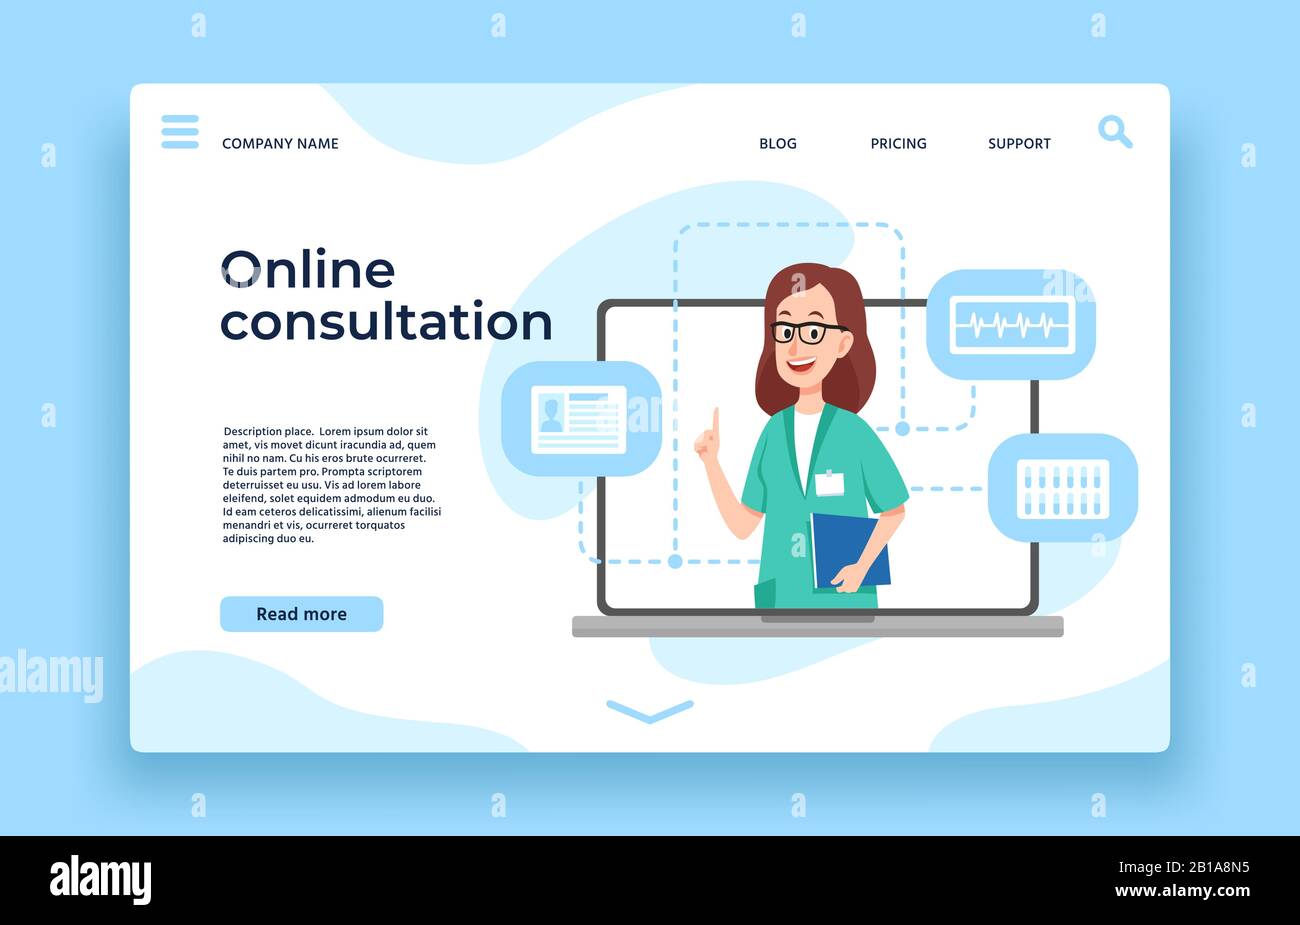 Online doctor consultation. Patient health consultation, online medical help and doctors meeting landing page vector illustration Stock Vector